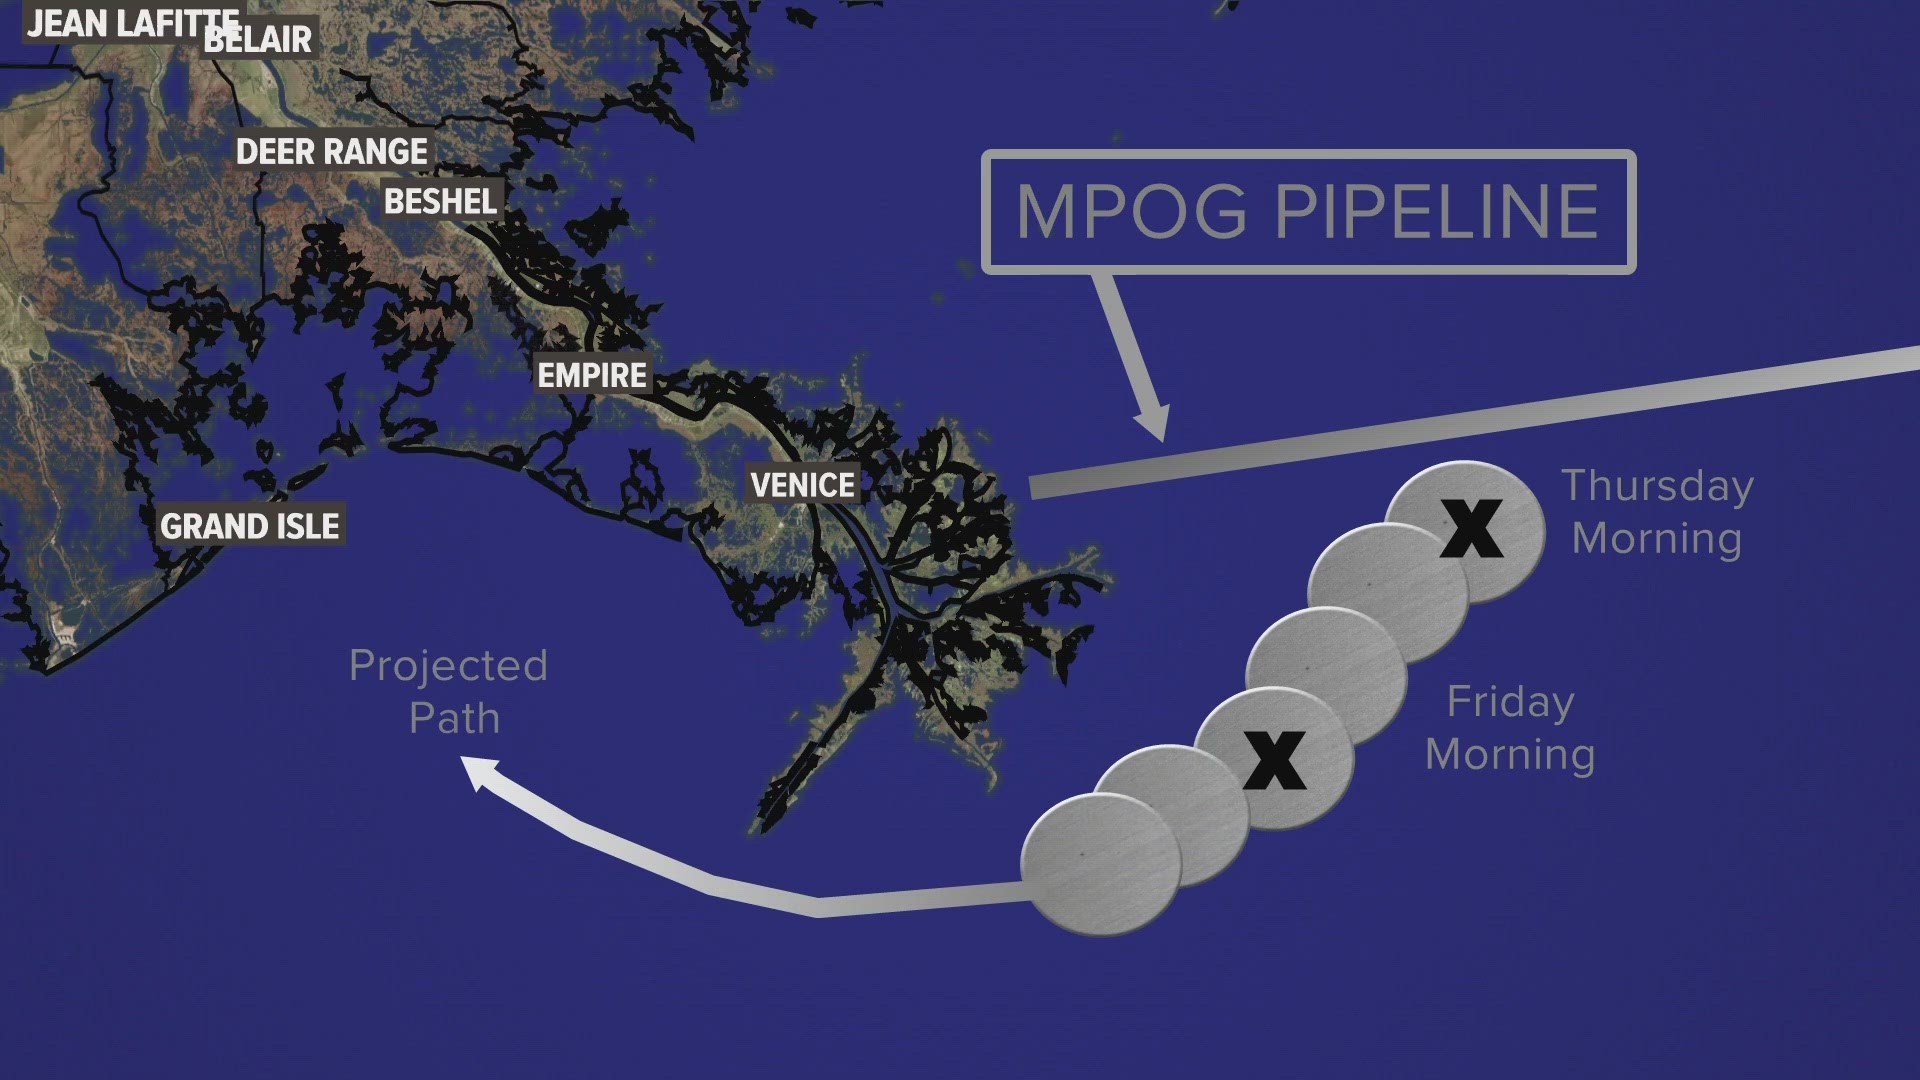 U.S. Coast Guard and NOAA say the oil spilled into the Gulf of Mexico from the Main Pass Oil Gathering Co. pipeline, 19 miles east of the mouth of Main Pass.